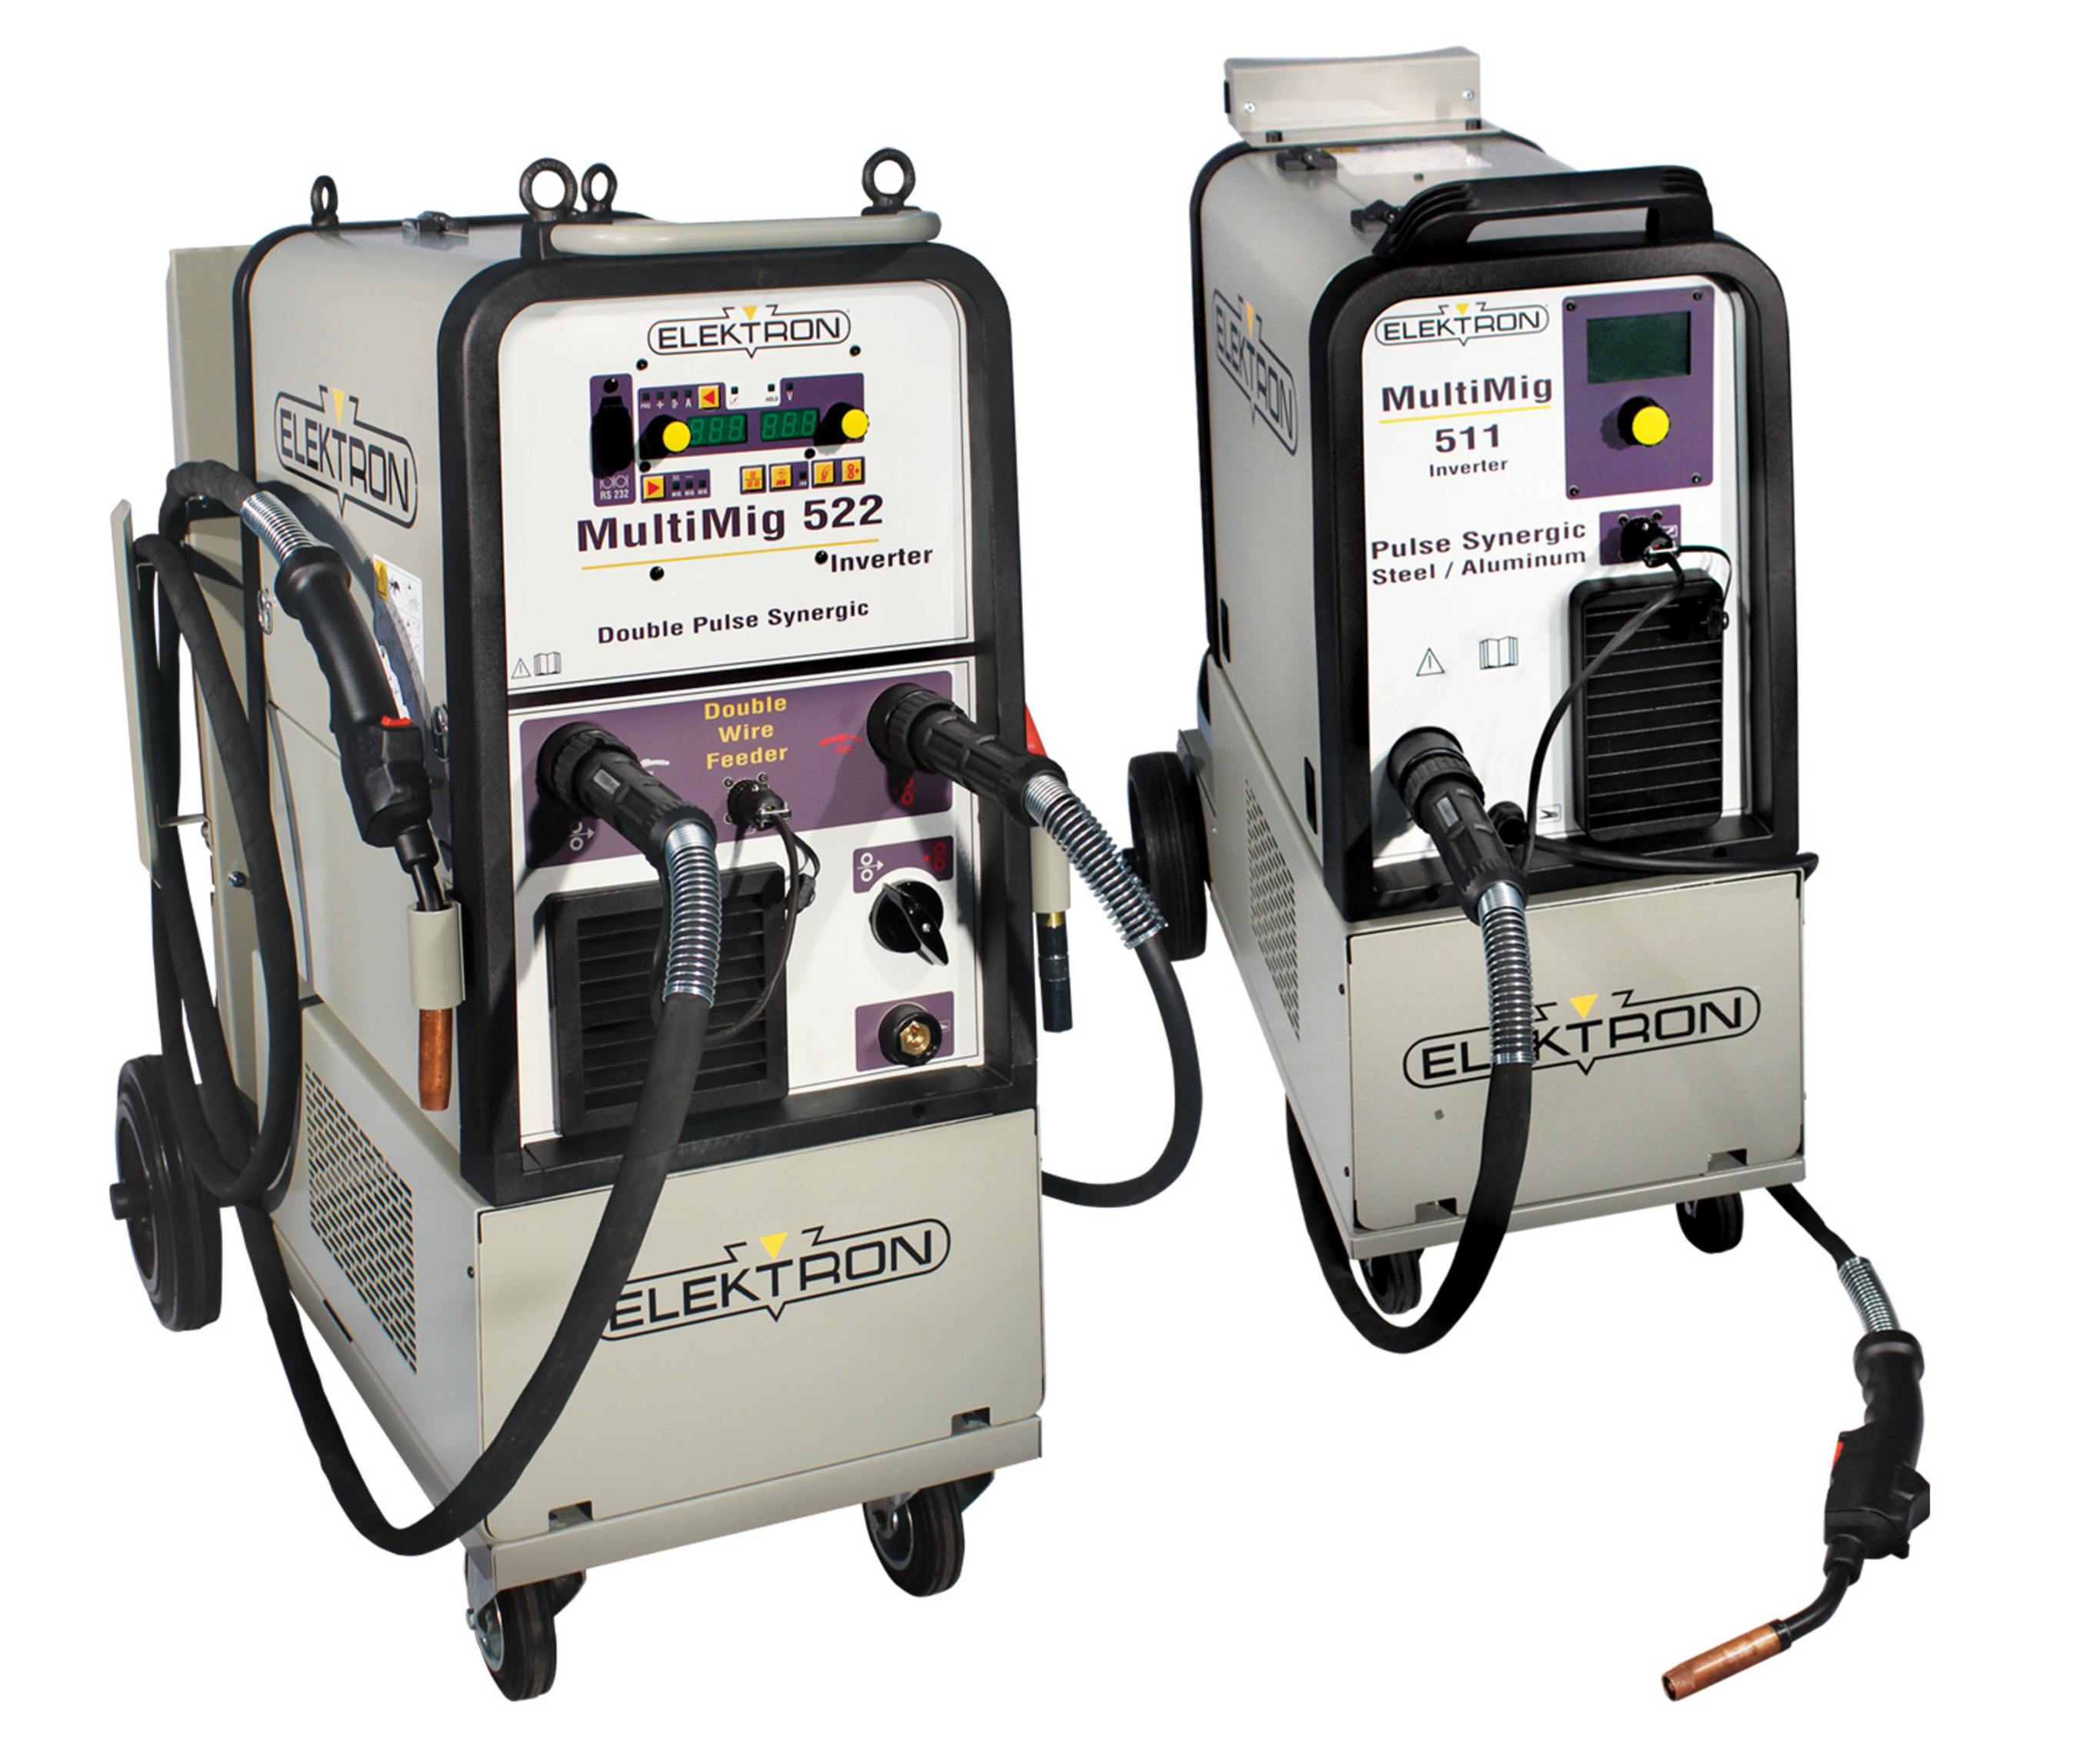 Elektron’s new MultiMig 511 and MultiMig 522 MIG/MAG inverter welders are designed to help technicians weld aluminum as easily as they weld steel. Both welders are included in the Ford 2015 F-150 Collision Repair Program. (PRNewsFoto/Elektron)